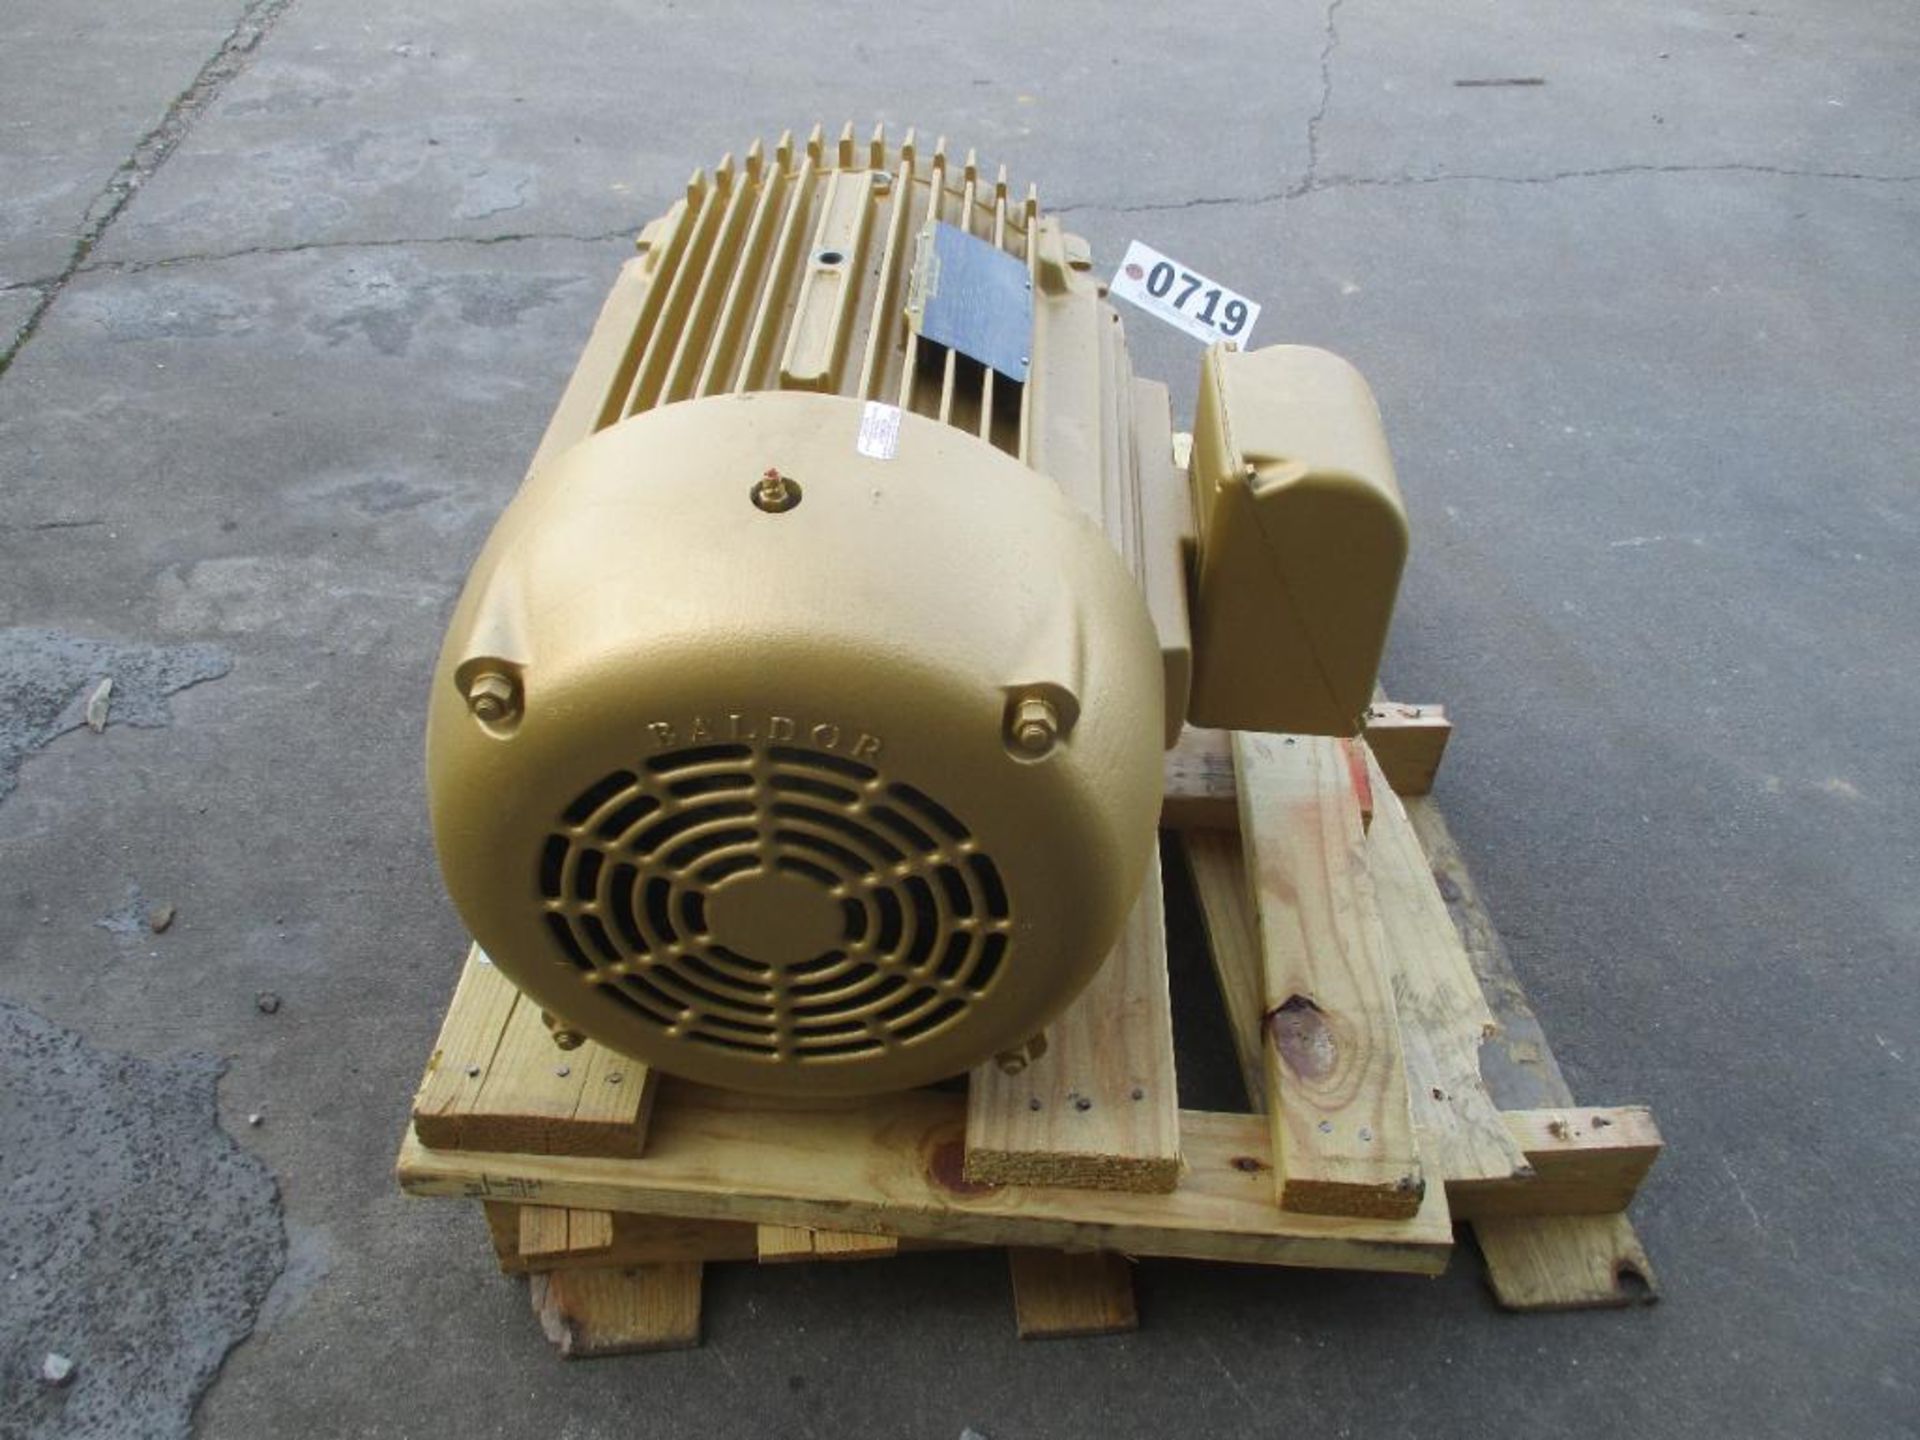 BALDOR 3 PHASE 40HP 1775RPM 324T FRAME A/C MOTOR P/N EM4110T 585# LBS (THIS LOT IS FOB KNOXVILLE TN) - Image 4 of 5